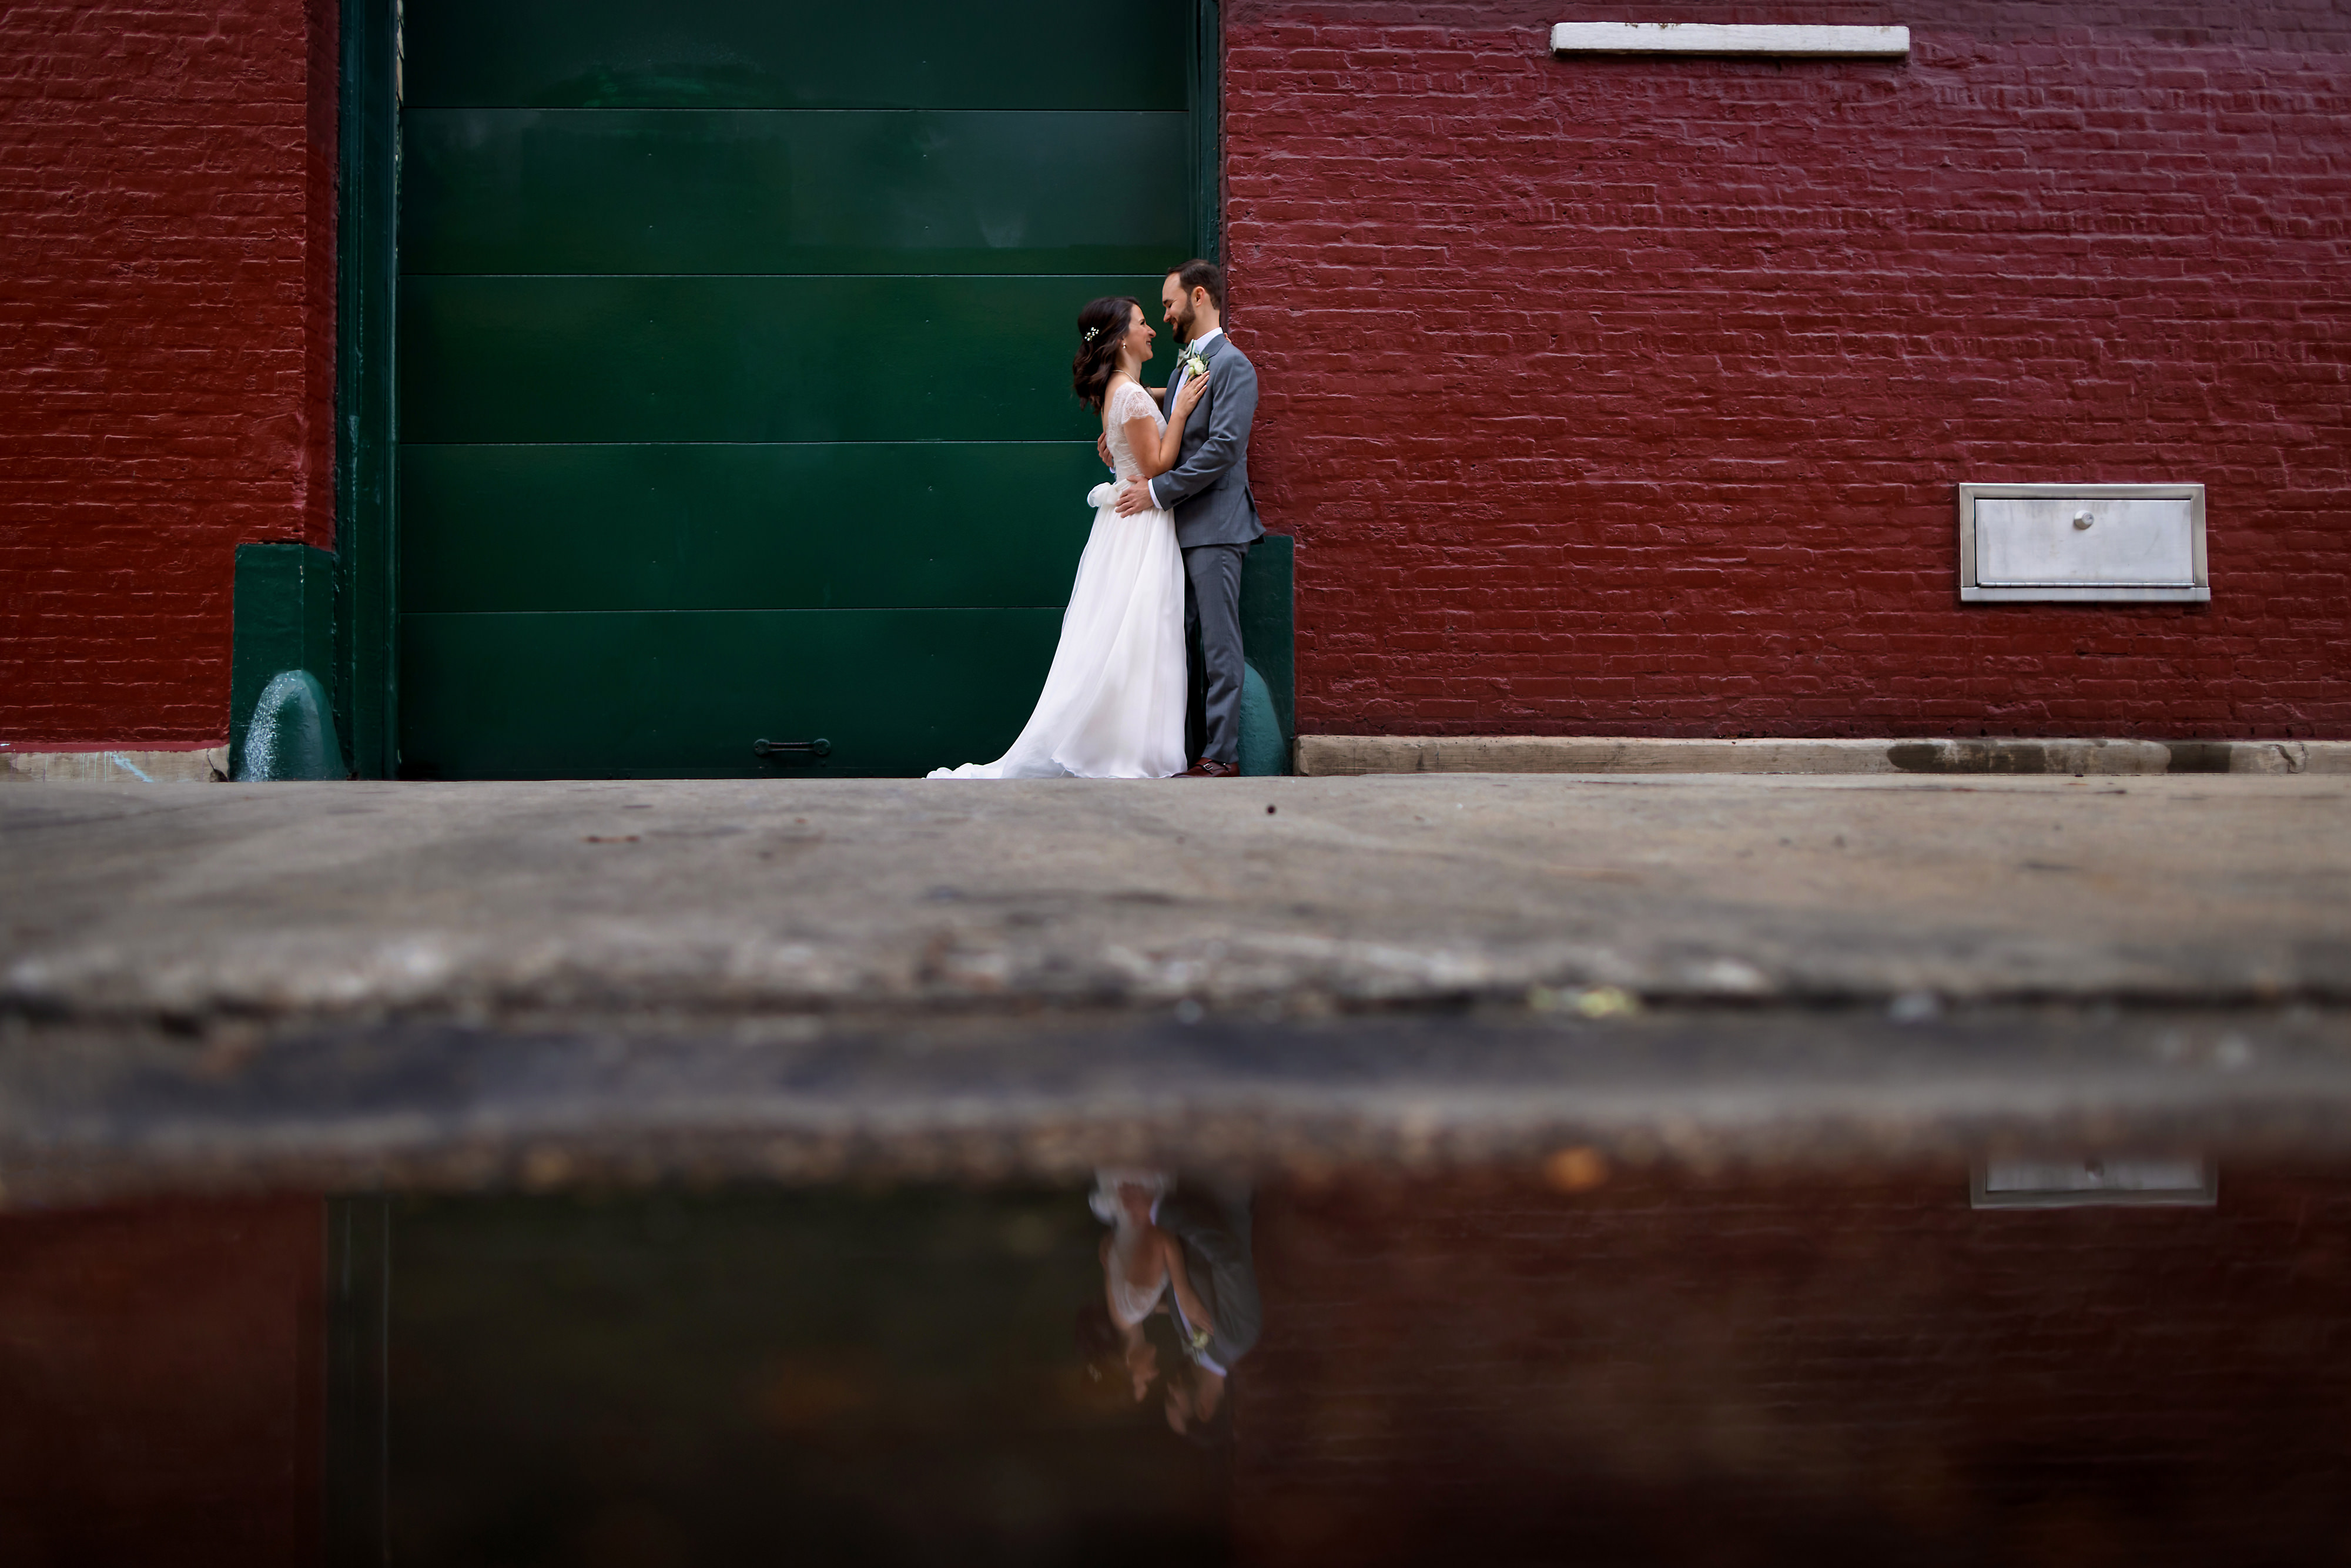 Bride and groom pose for a portrait under the El Tracks on Lake Street in Chicago's West Loop neighborhood.